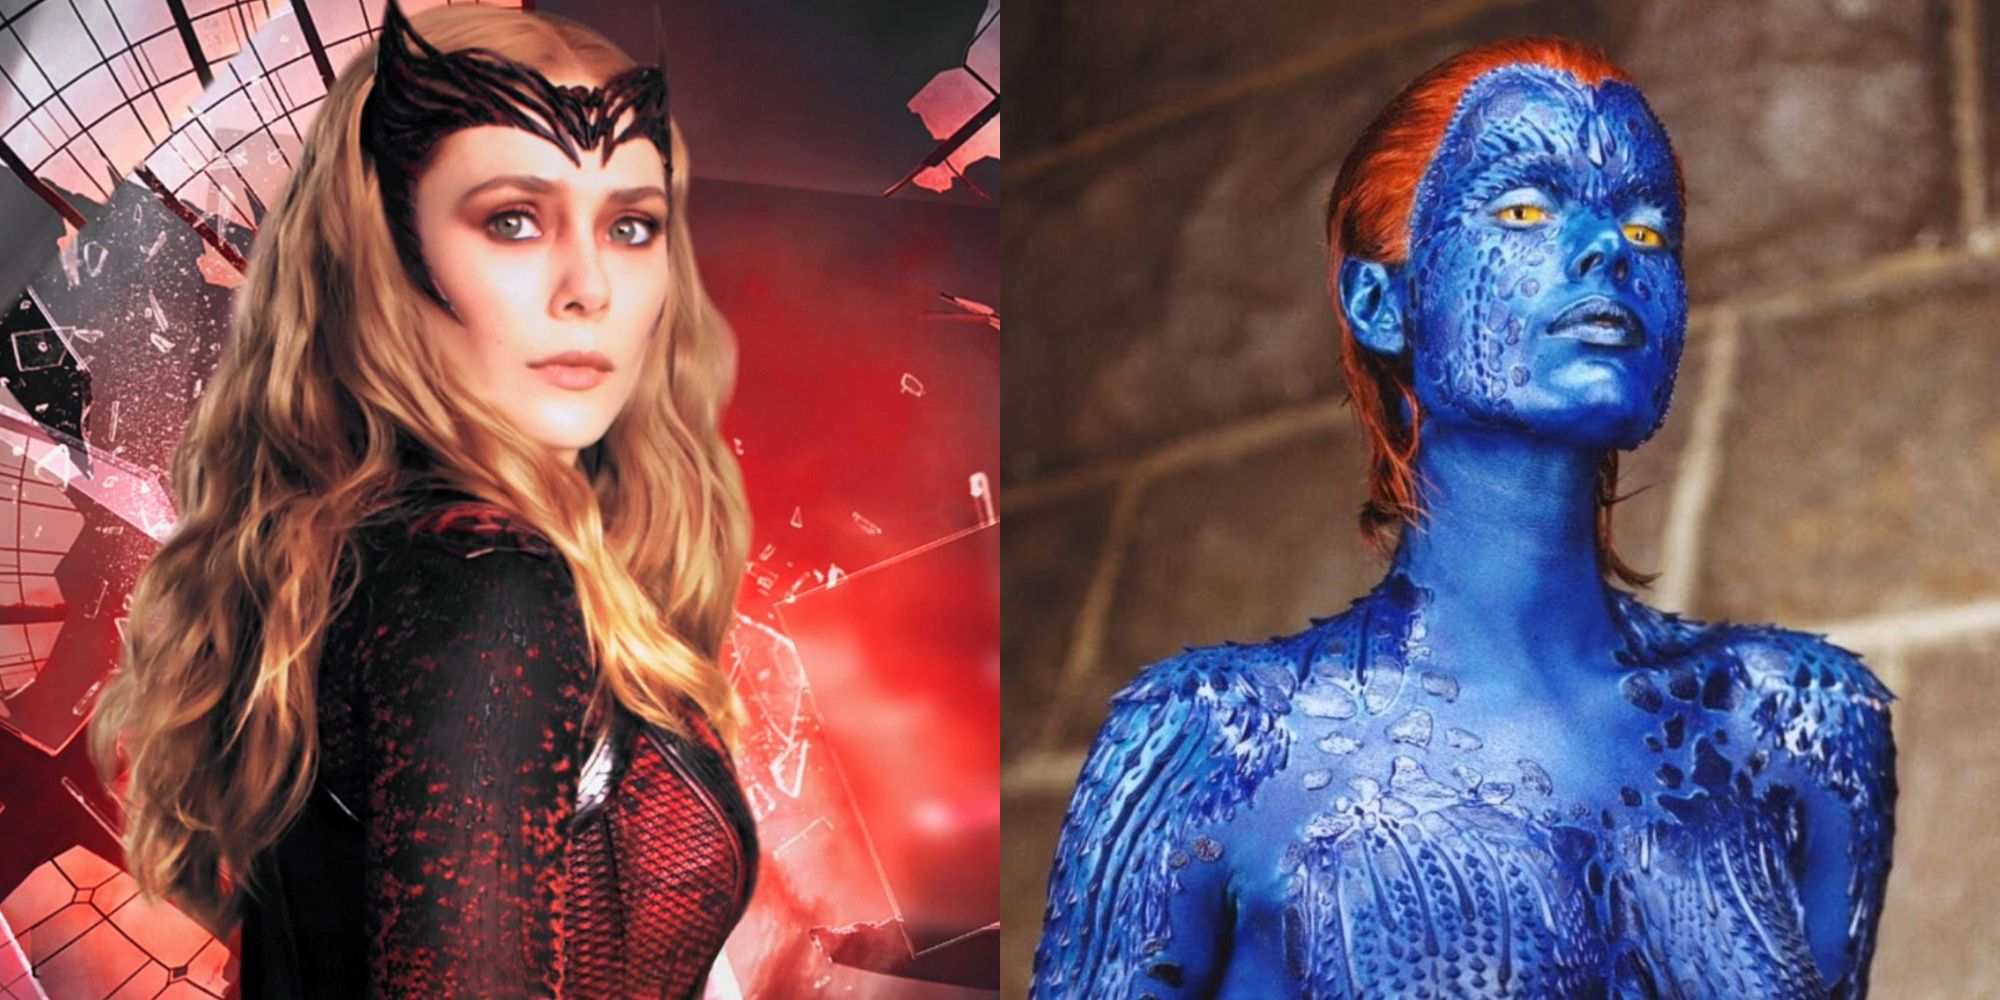 Split image showing Scarlet Witch and Mystique.